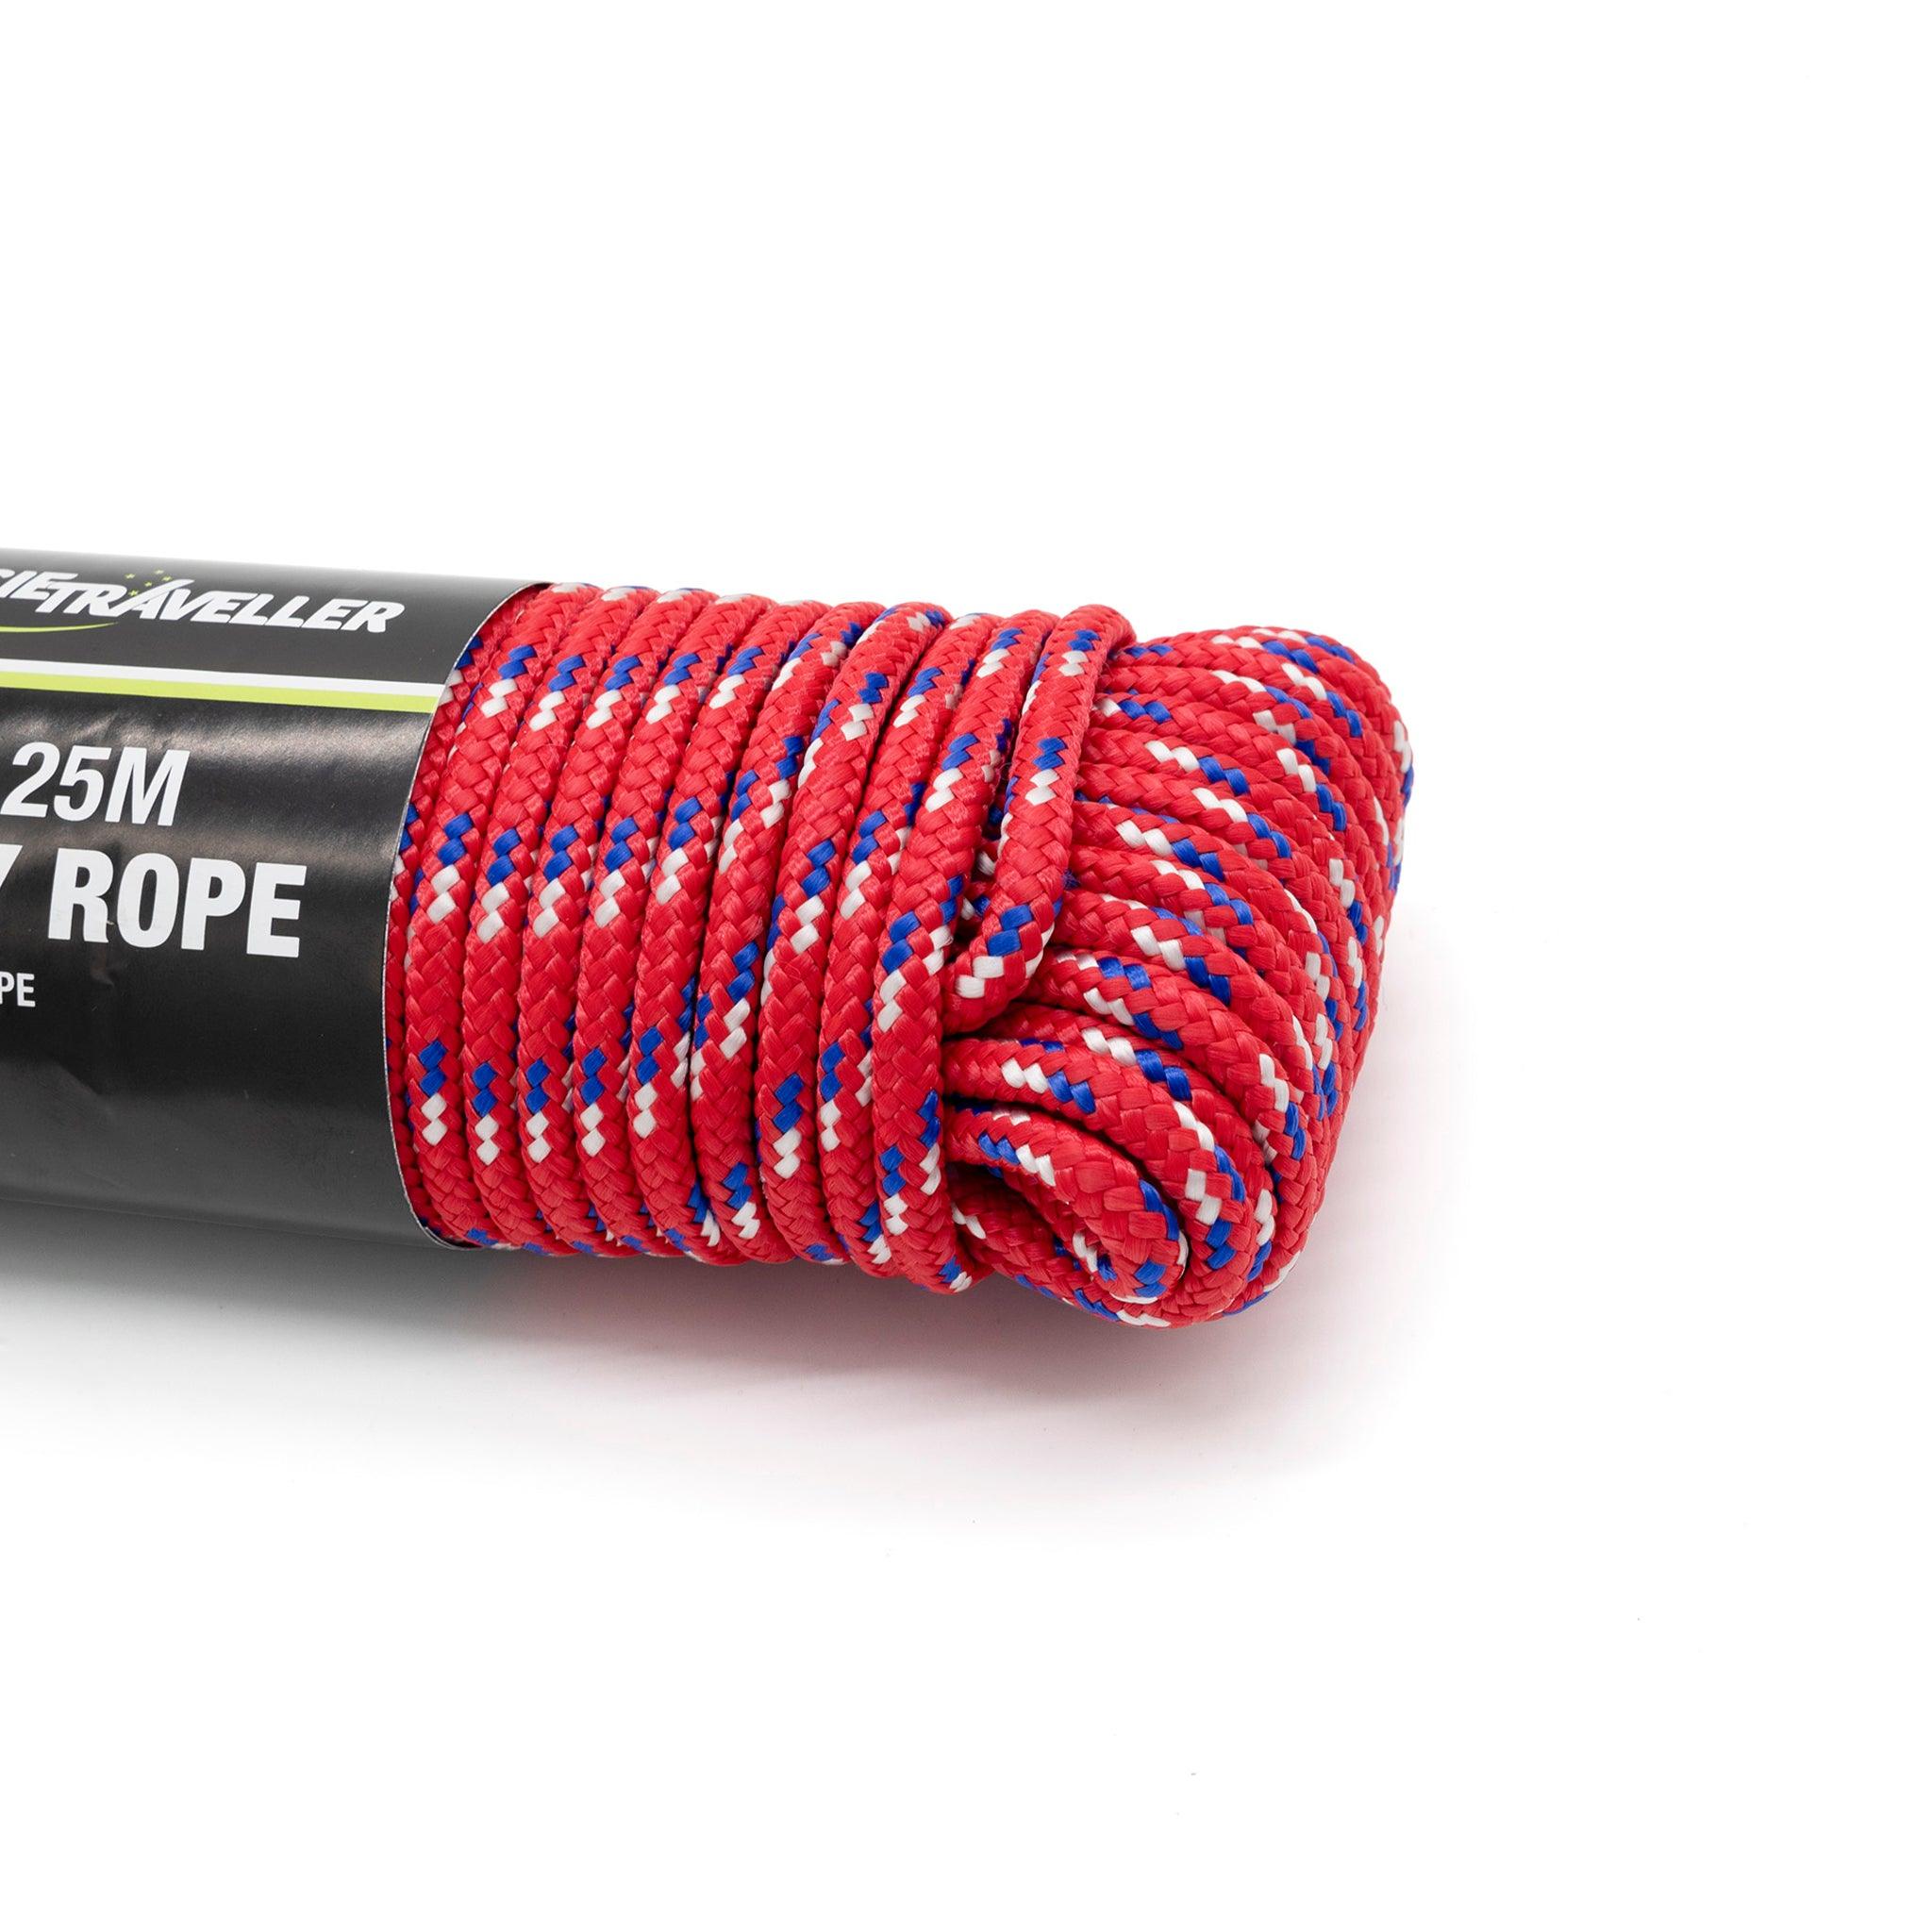 Utility Rope 6mm x 25m - Yellow @ A$12.99